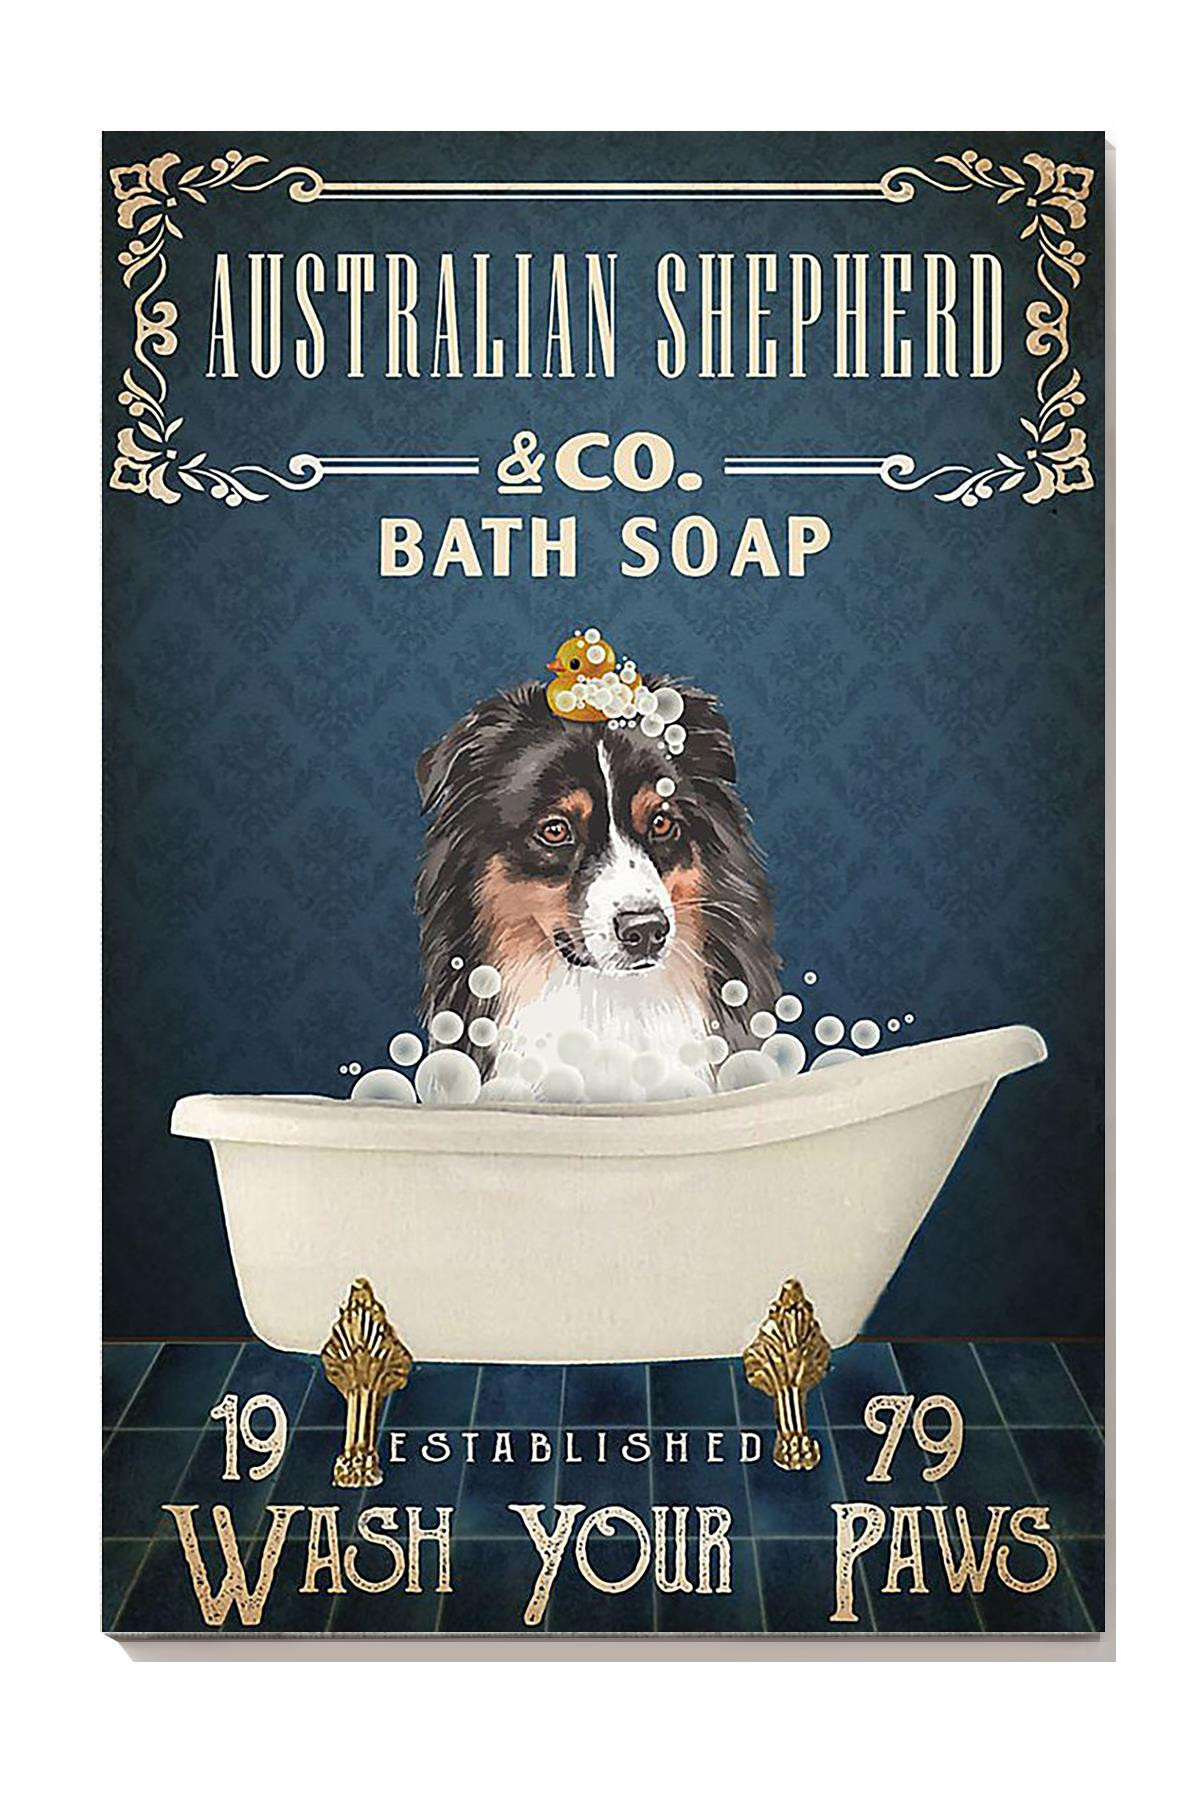 Australian Shepherd Bath Soap Wash Your Paws For Dog Lover Bathroom Decor1 Canvas Gallery Painting Wrapped Canvas Framed Prints, Canvas Paintings Wrapped Canvas 8x10